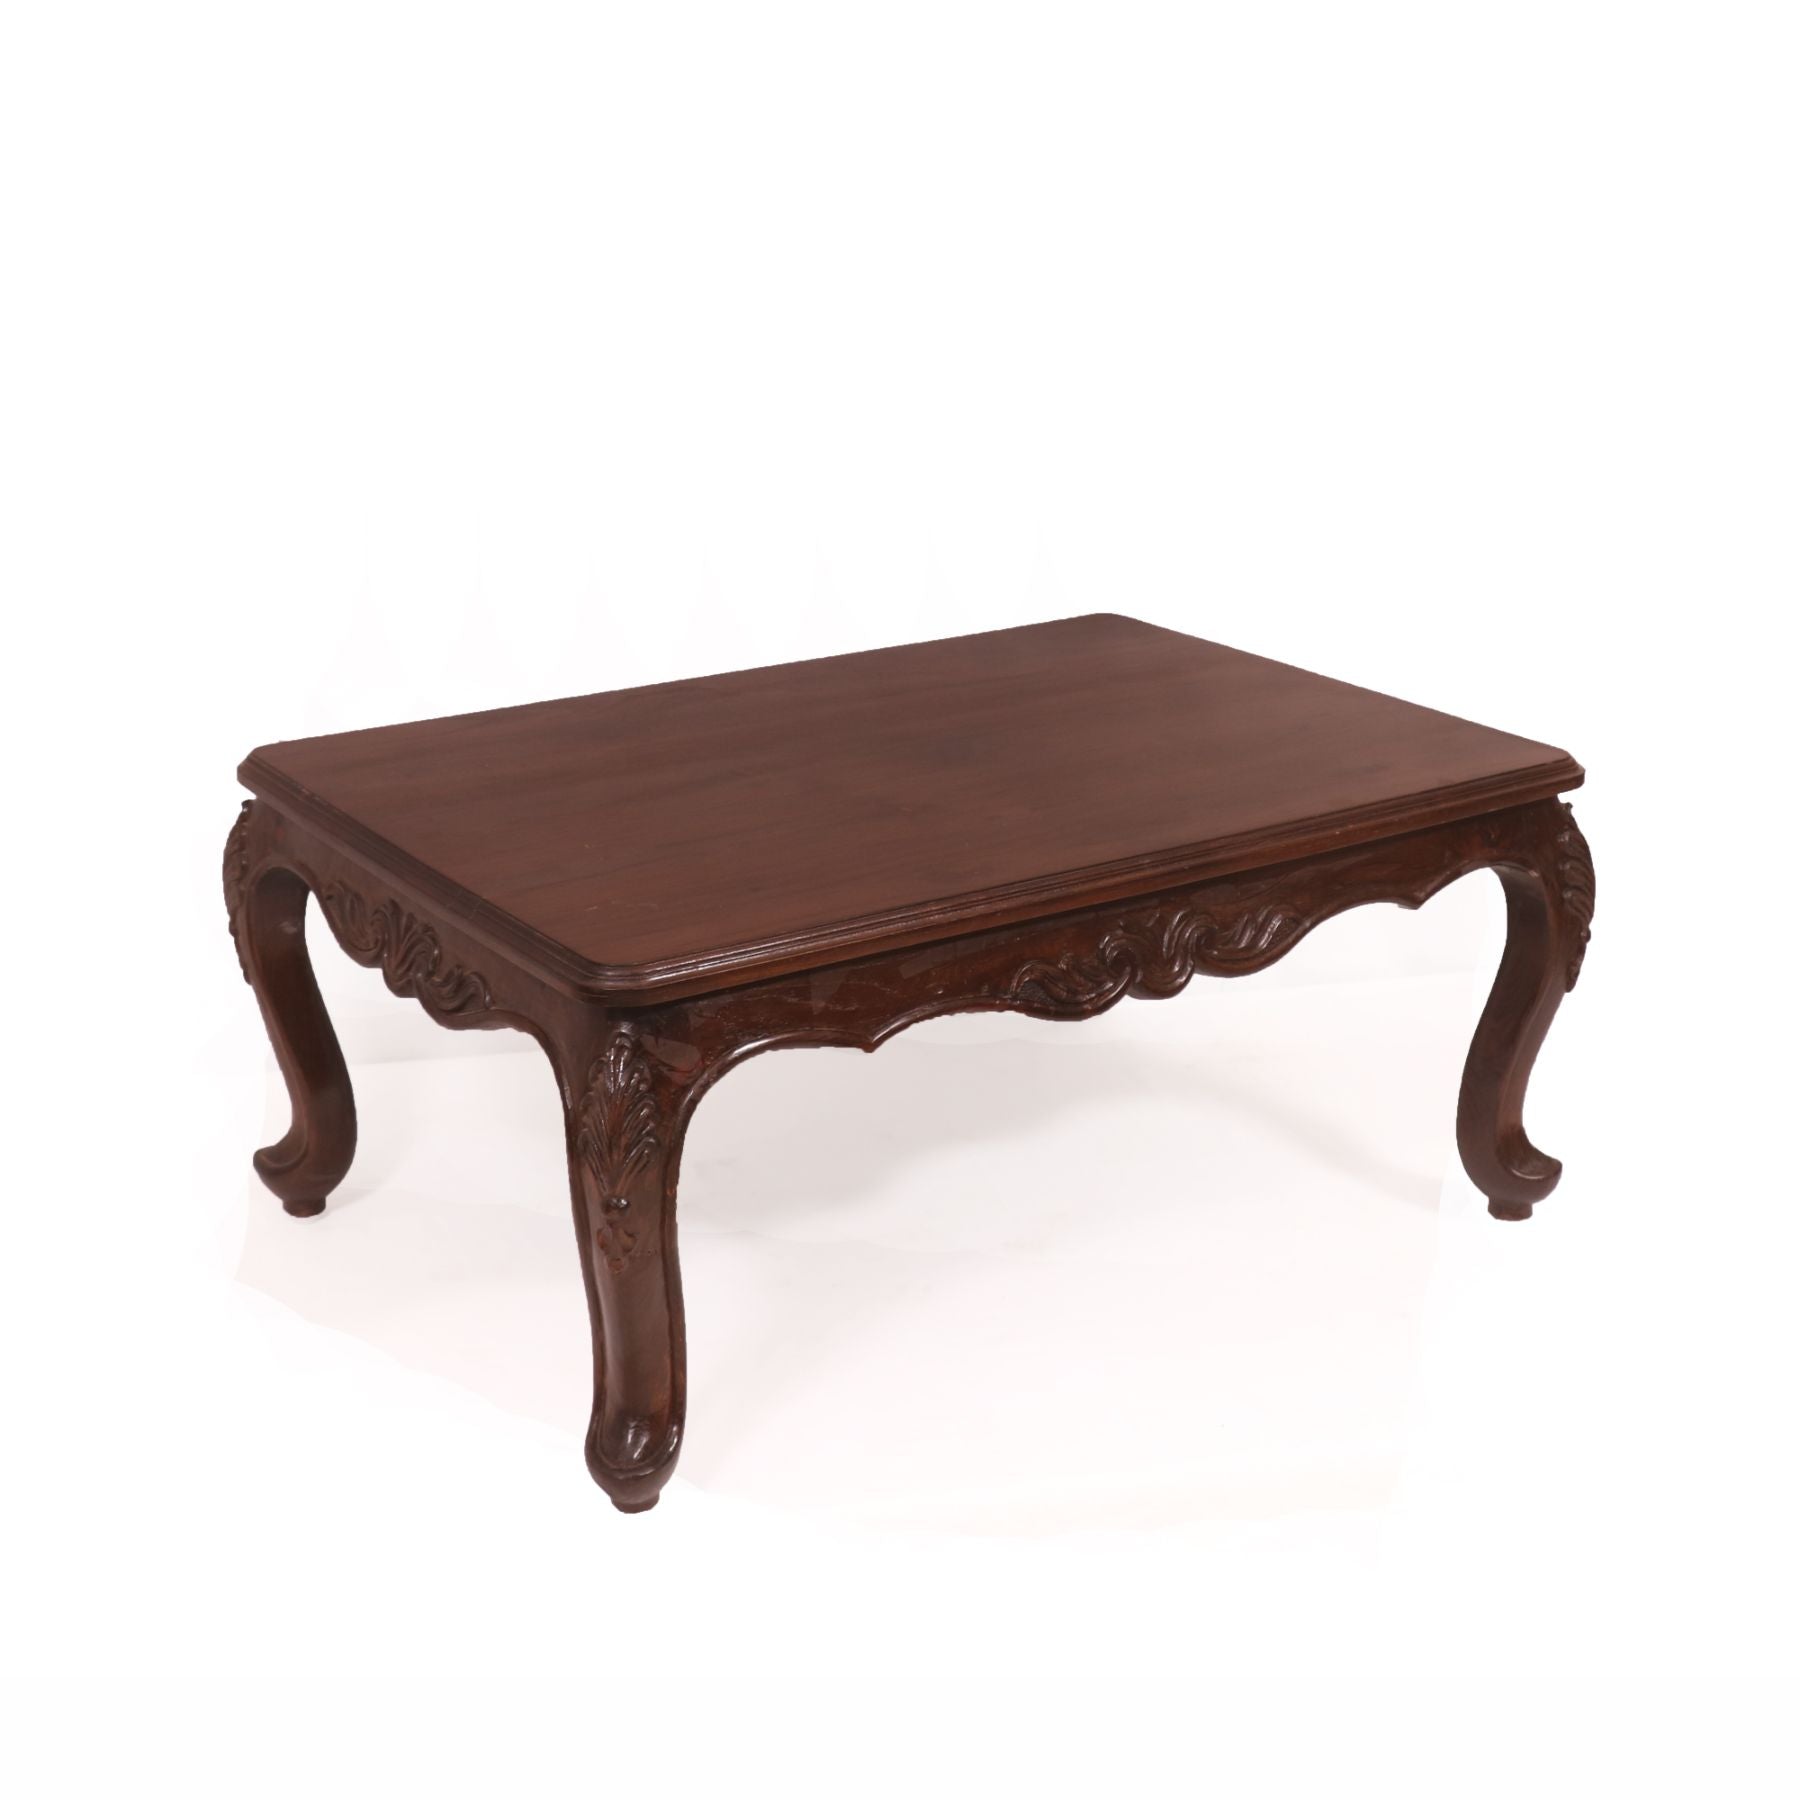 Simple Carved wooden Table Coffee Table